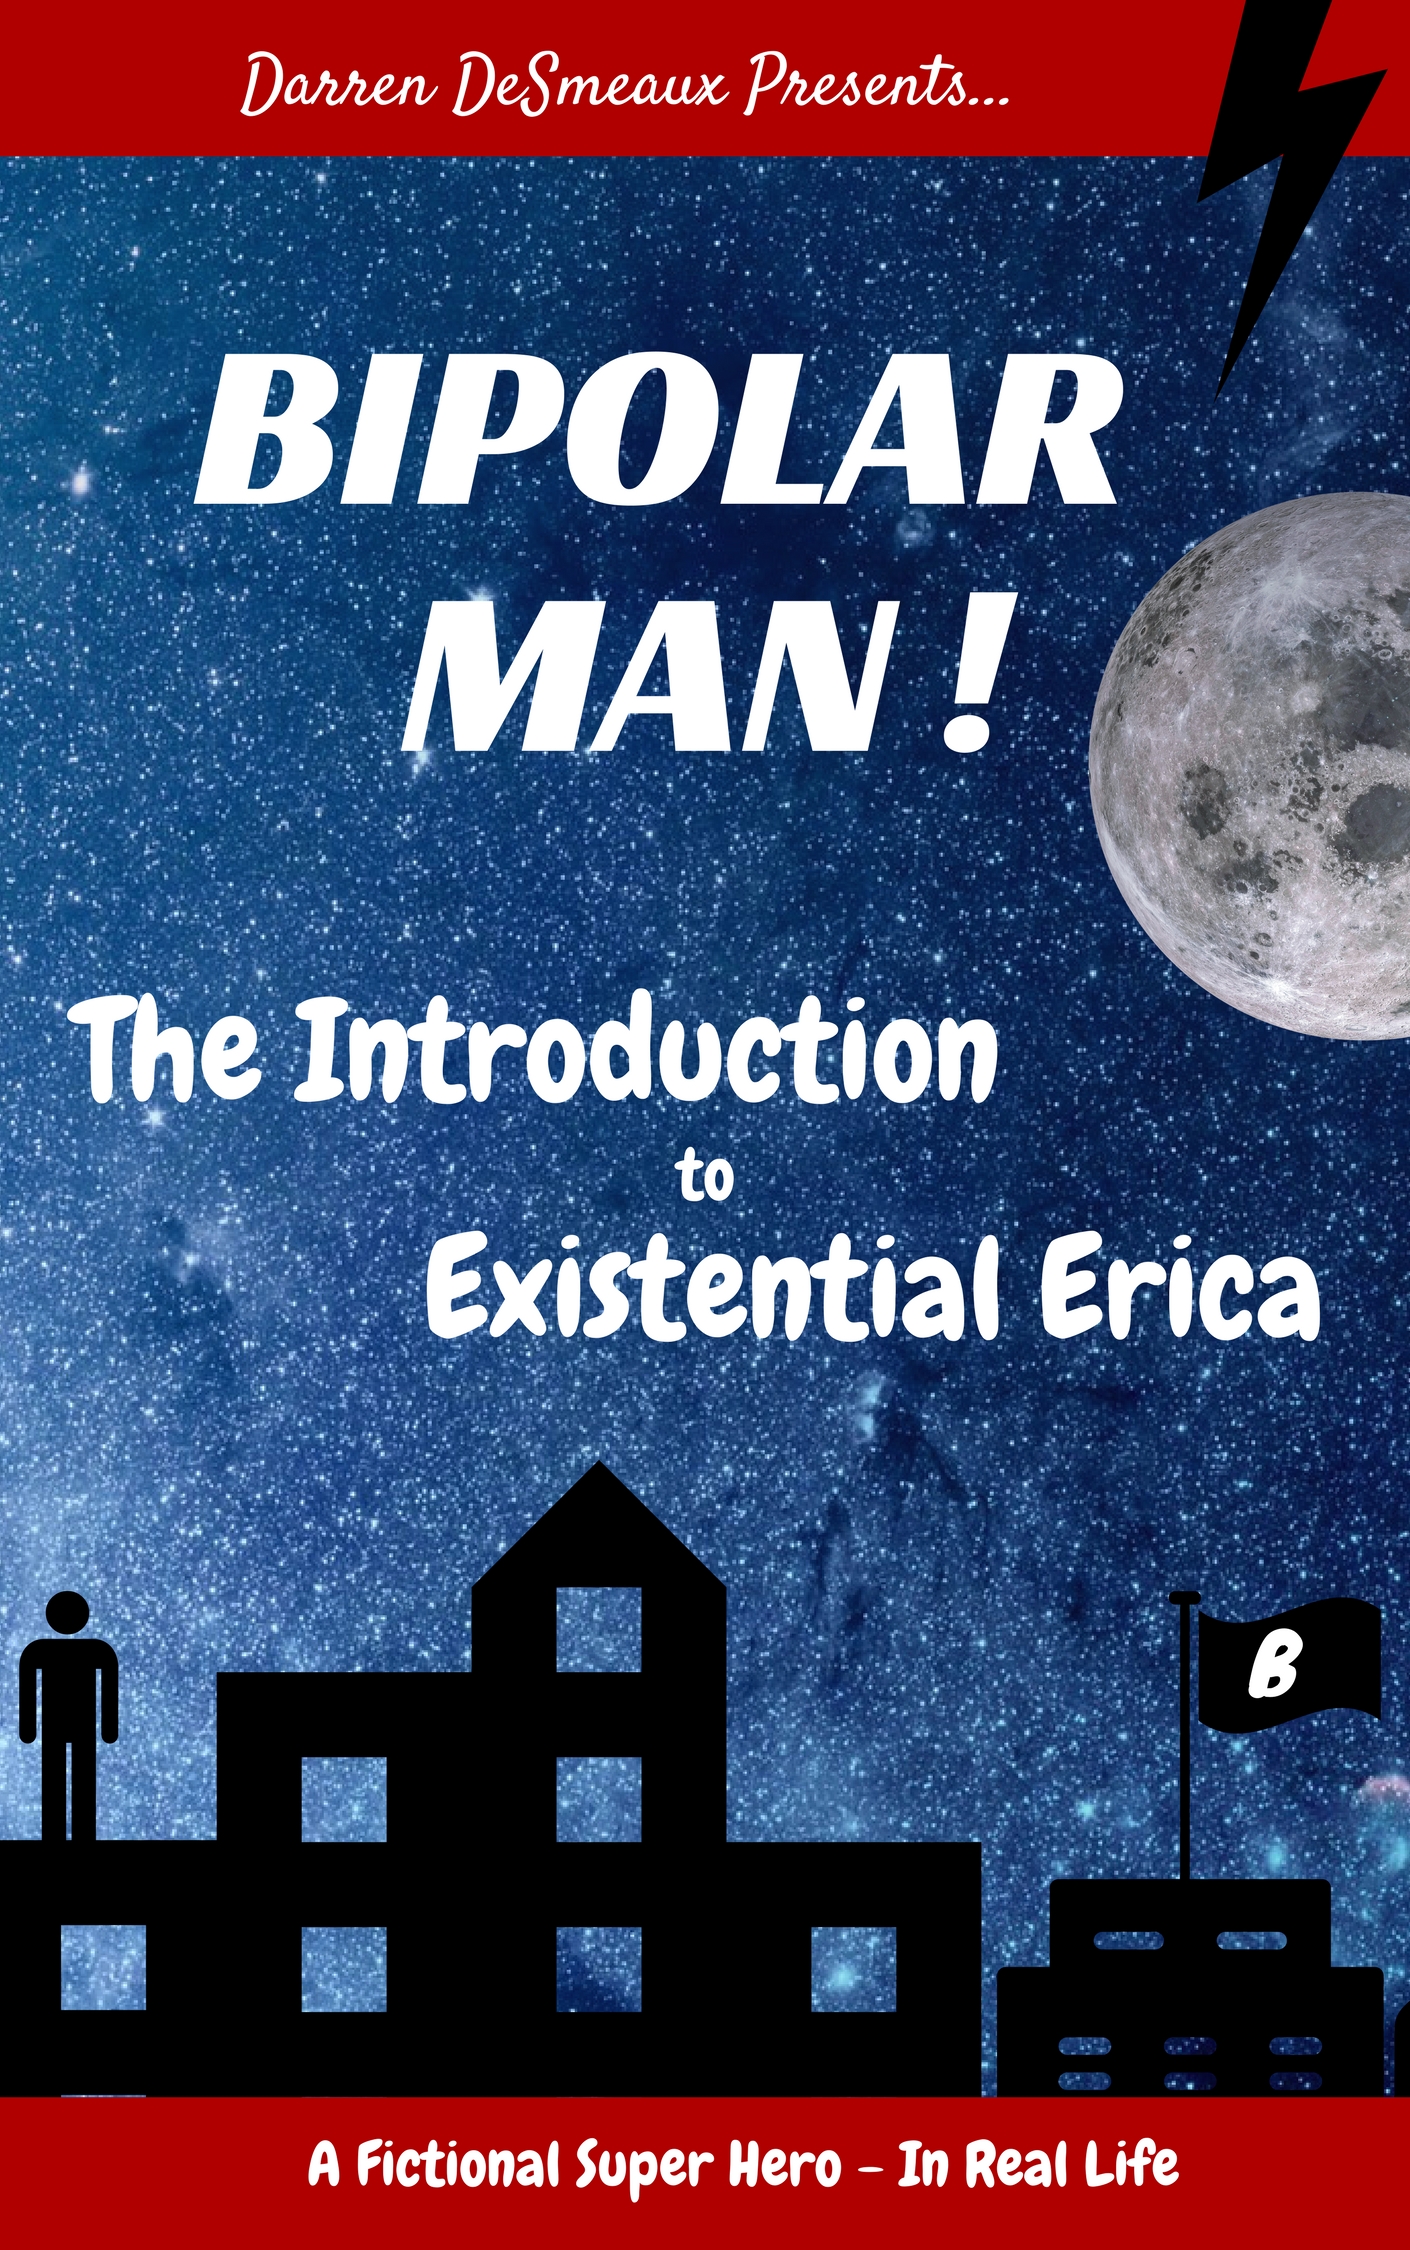 FREE: Bipolar Man! Comedic Adventures – The Introduction to Existential Erica by Darren DeSmeaux